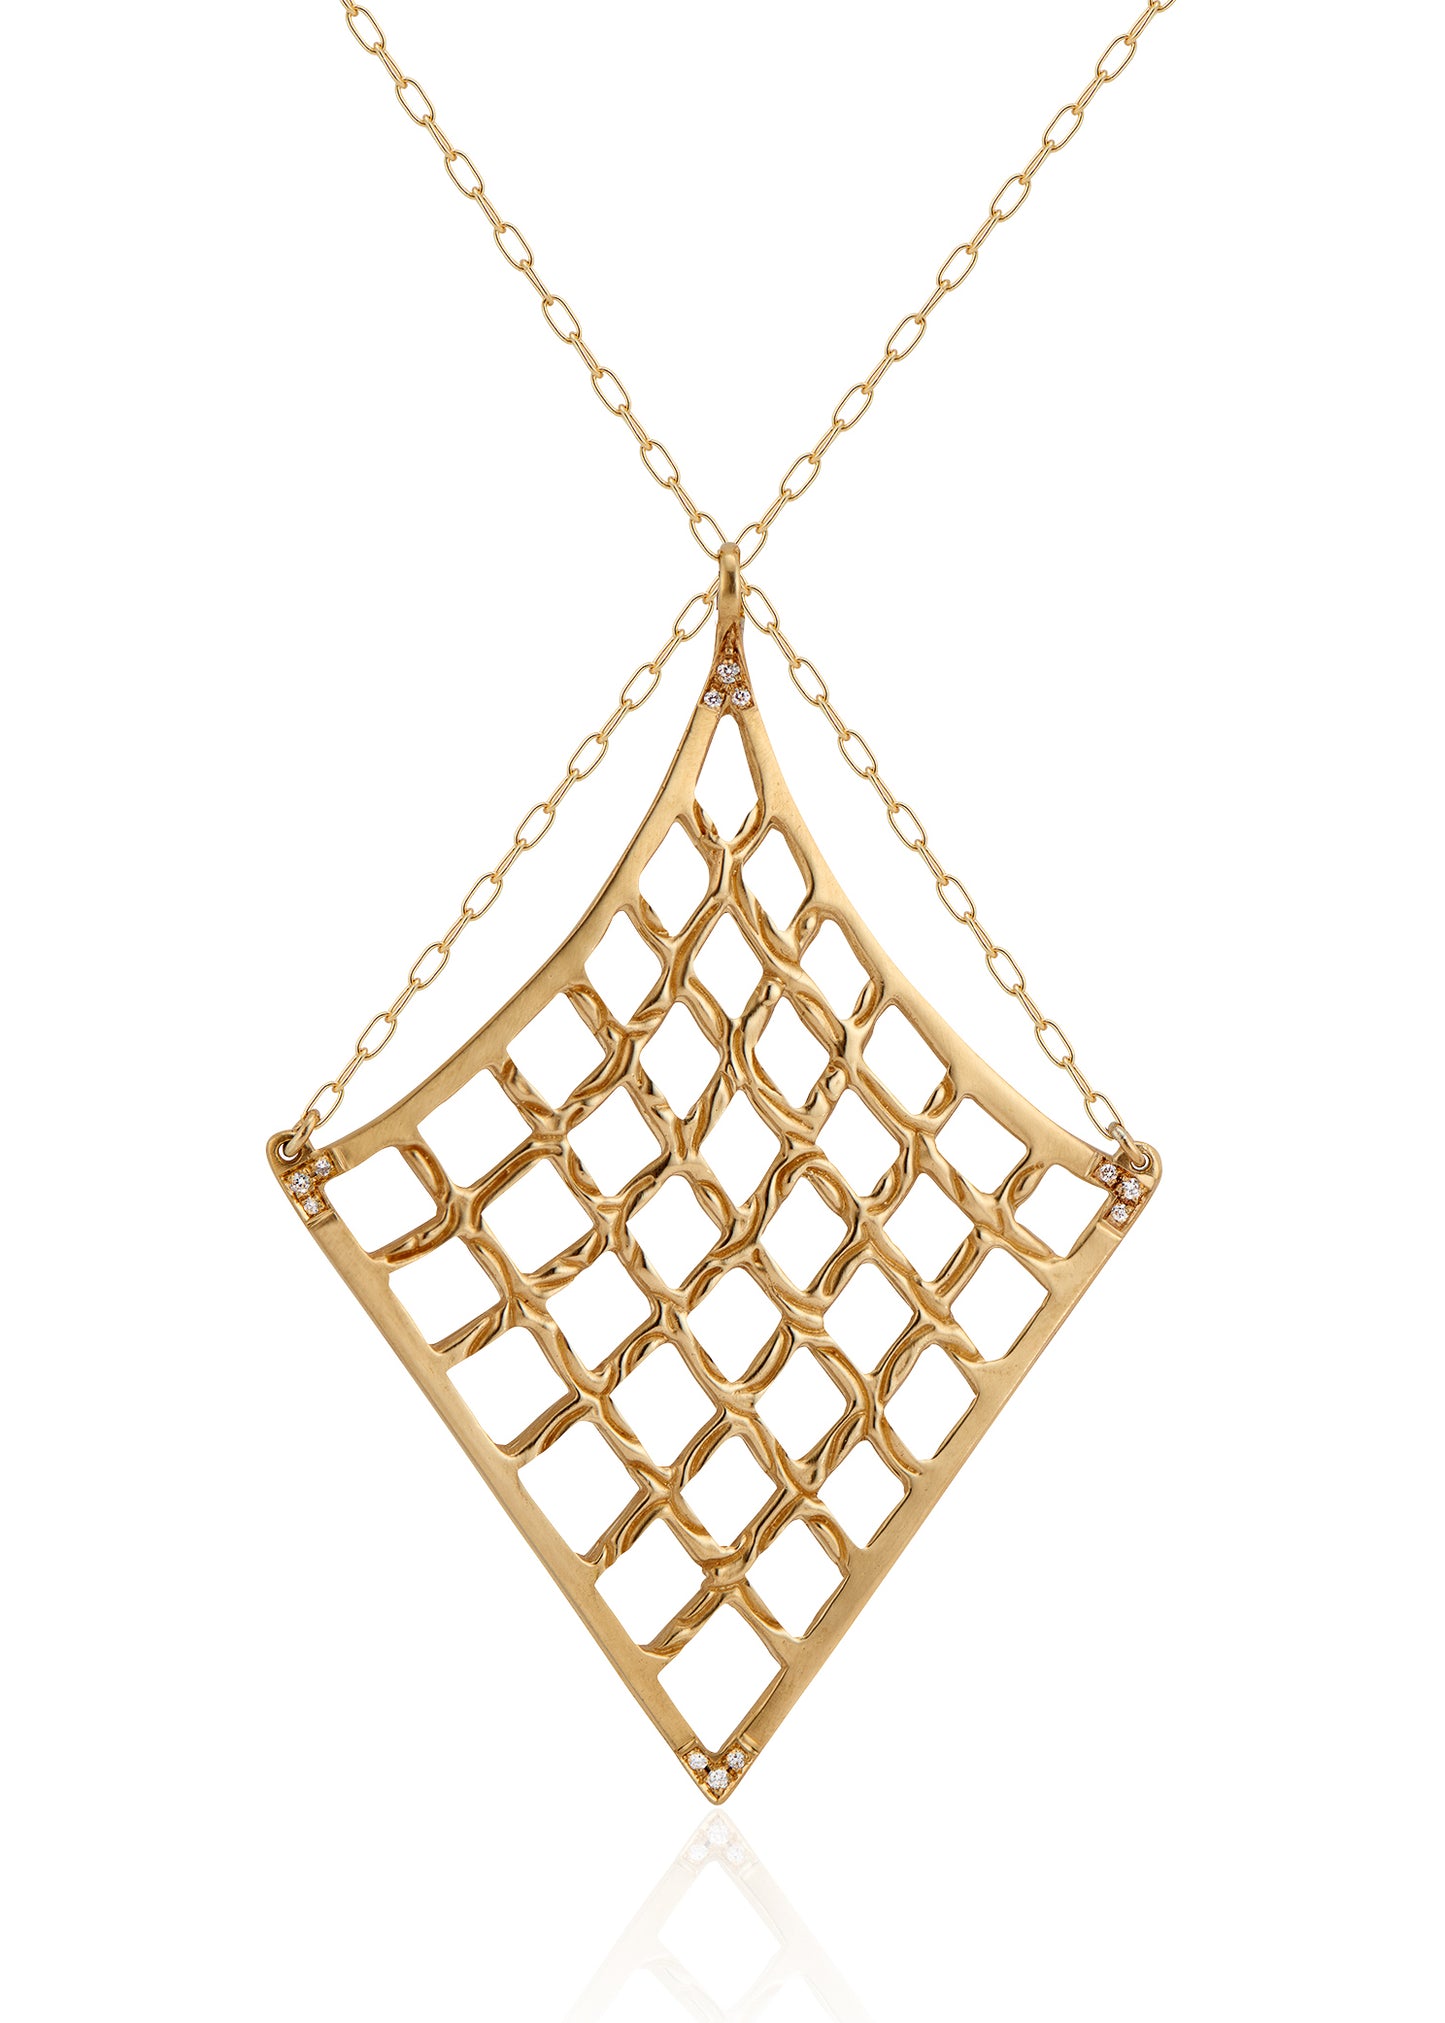 As formidable as the princess for which it is named. With its prominent presence and detailed gold lattice work, the Shera necklace is a balance of delicate, bold and eye-catching—an empowering piece that makes a statement.